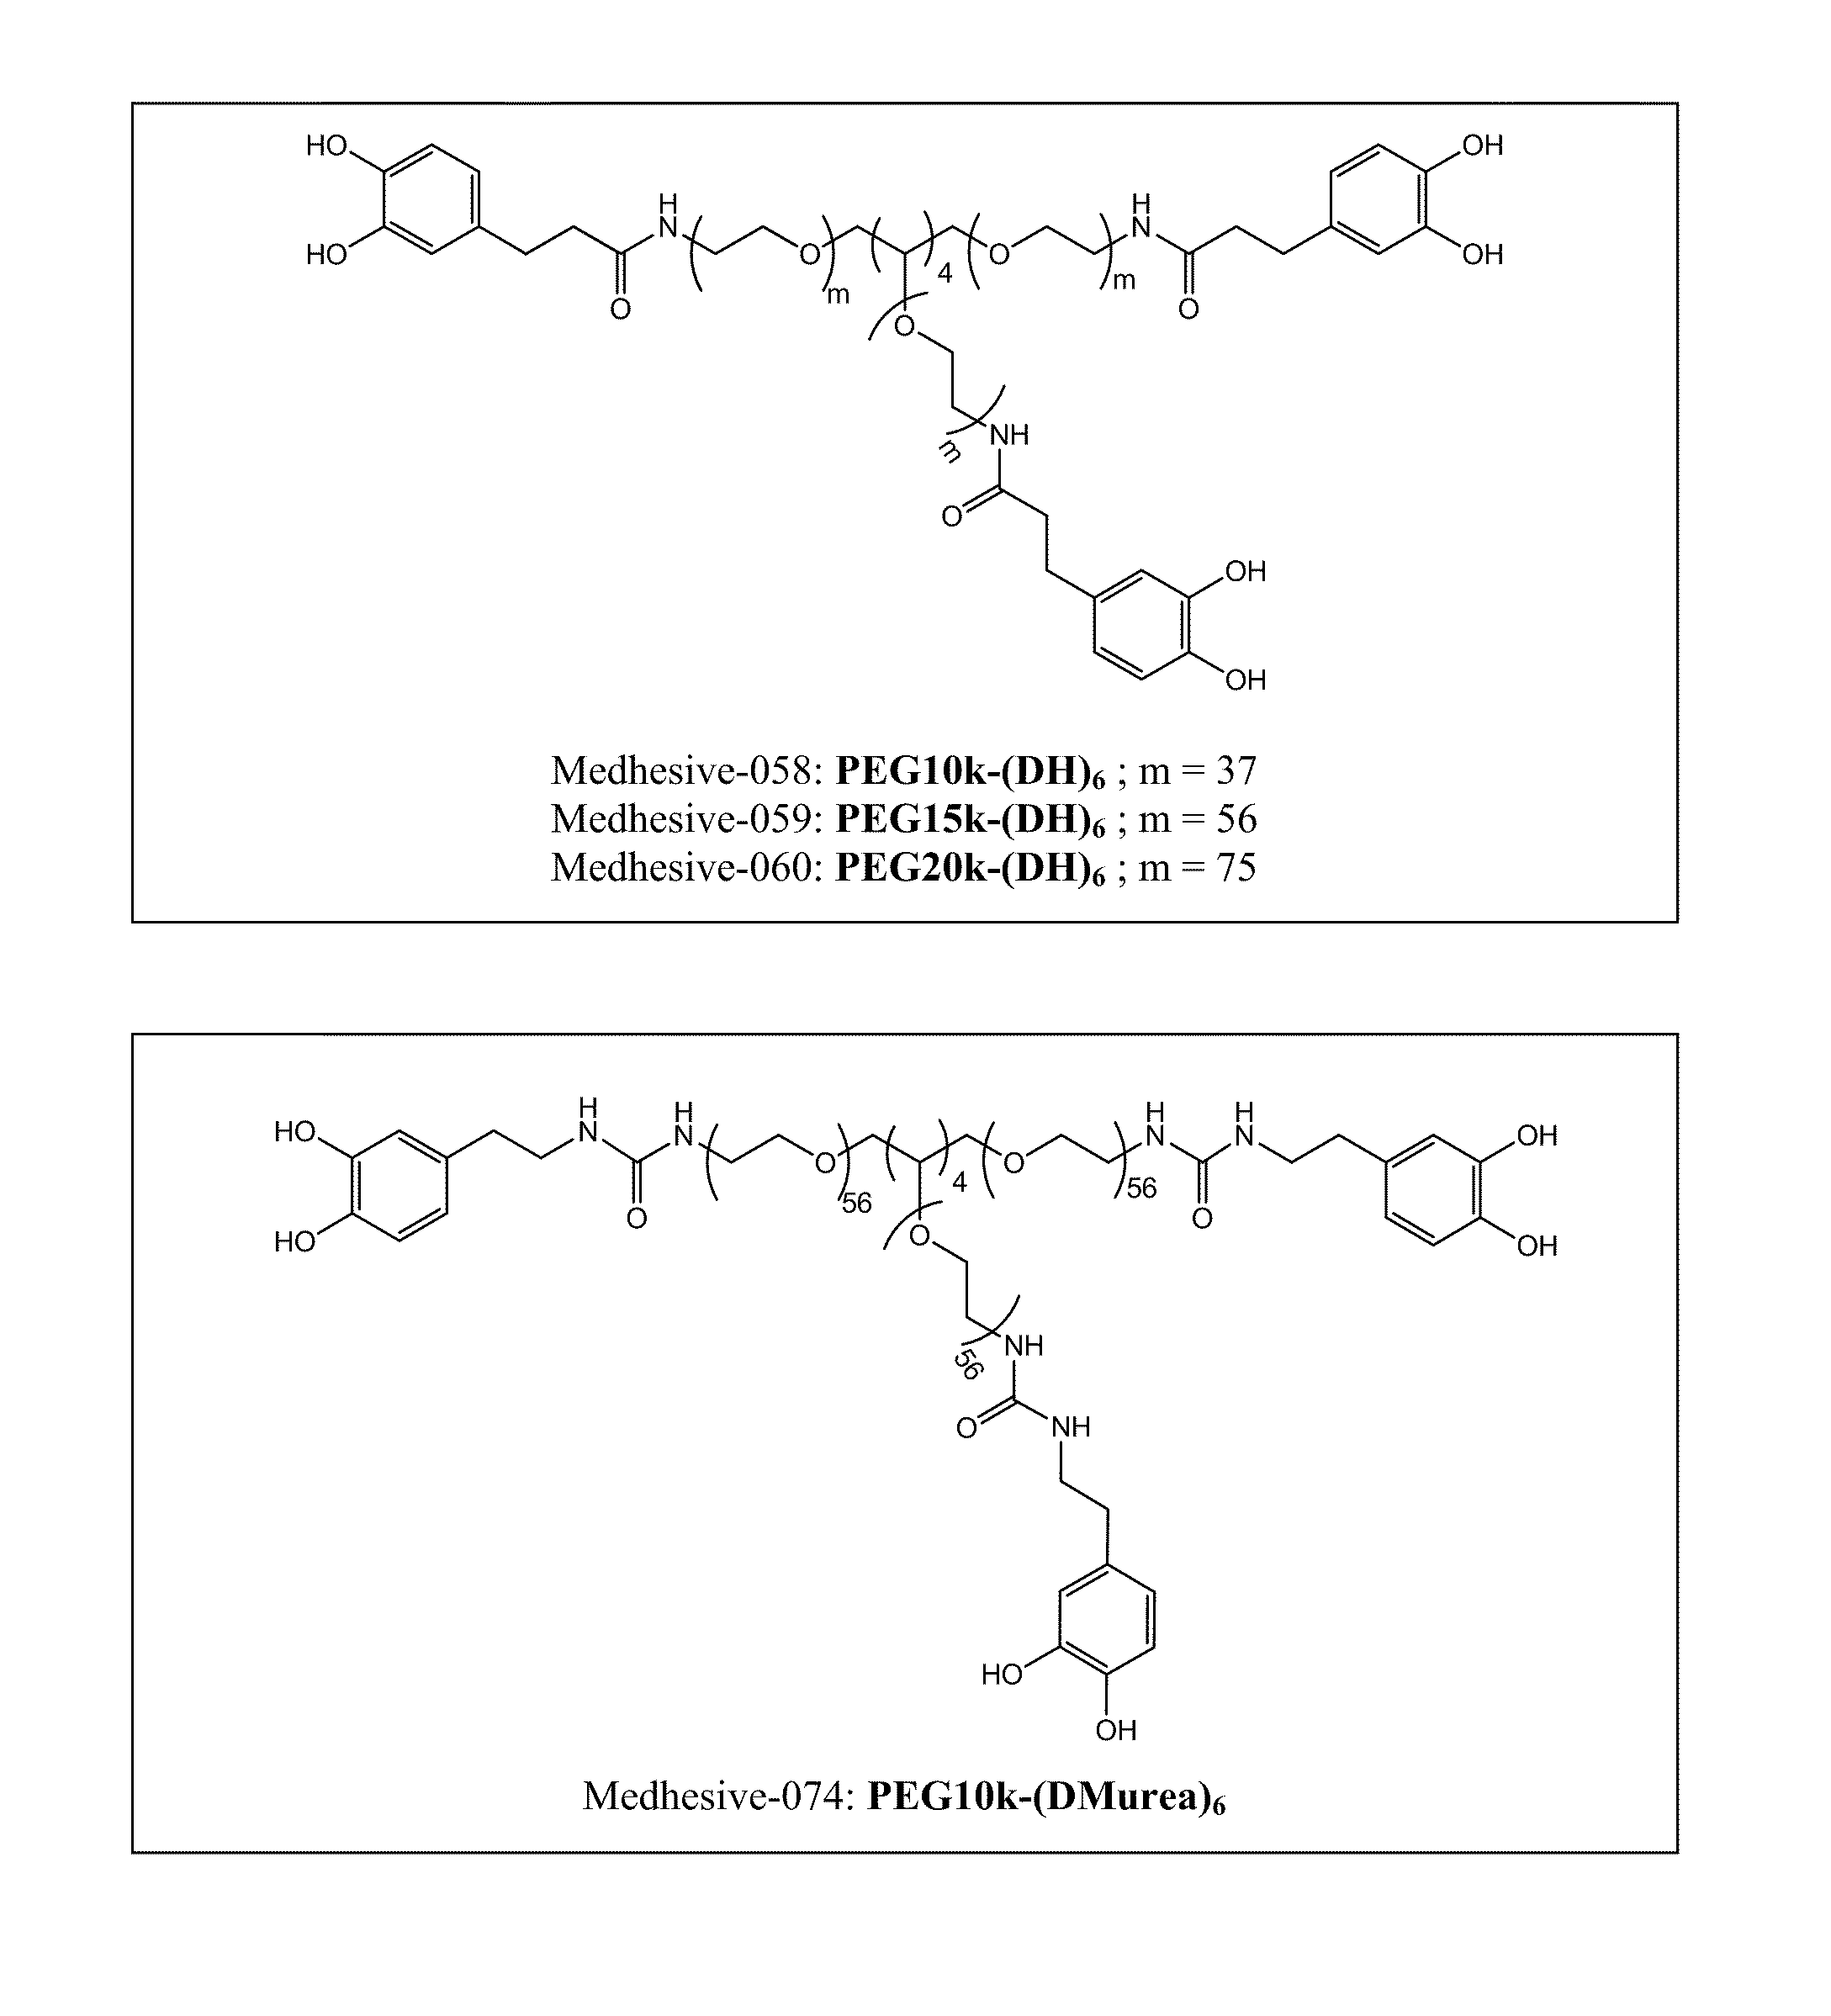 Multi-armed catechol compound blends